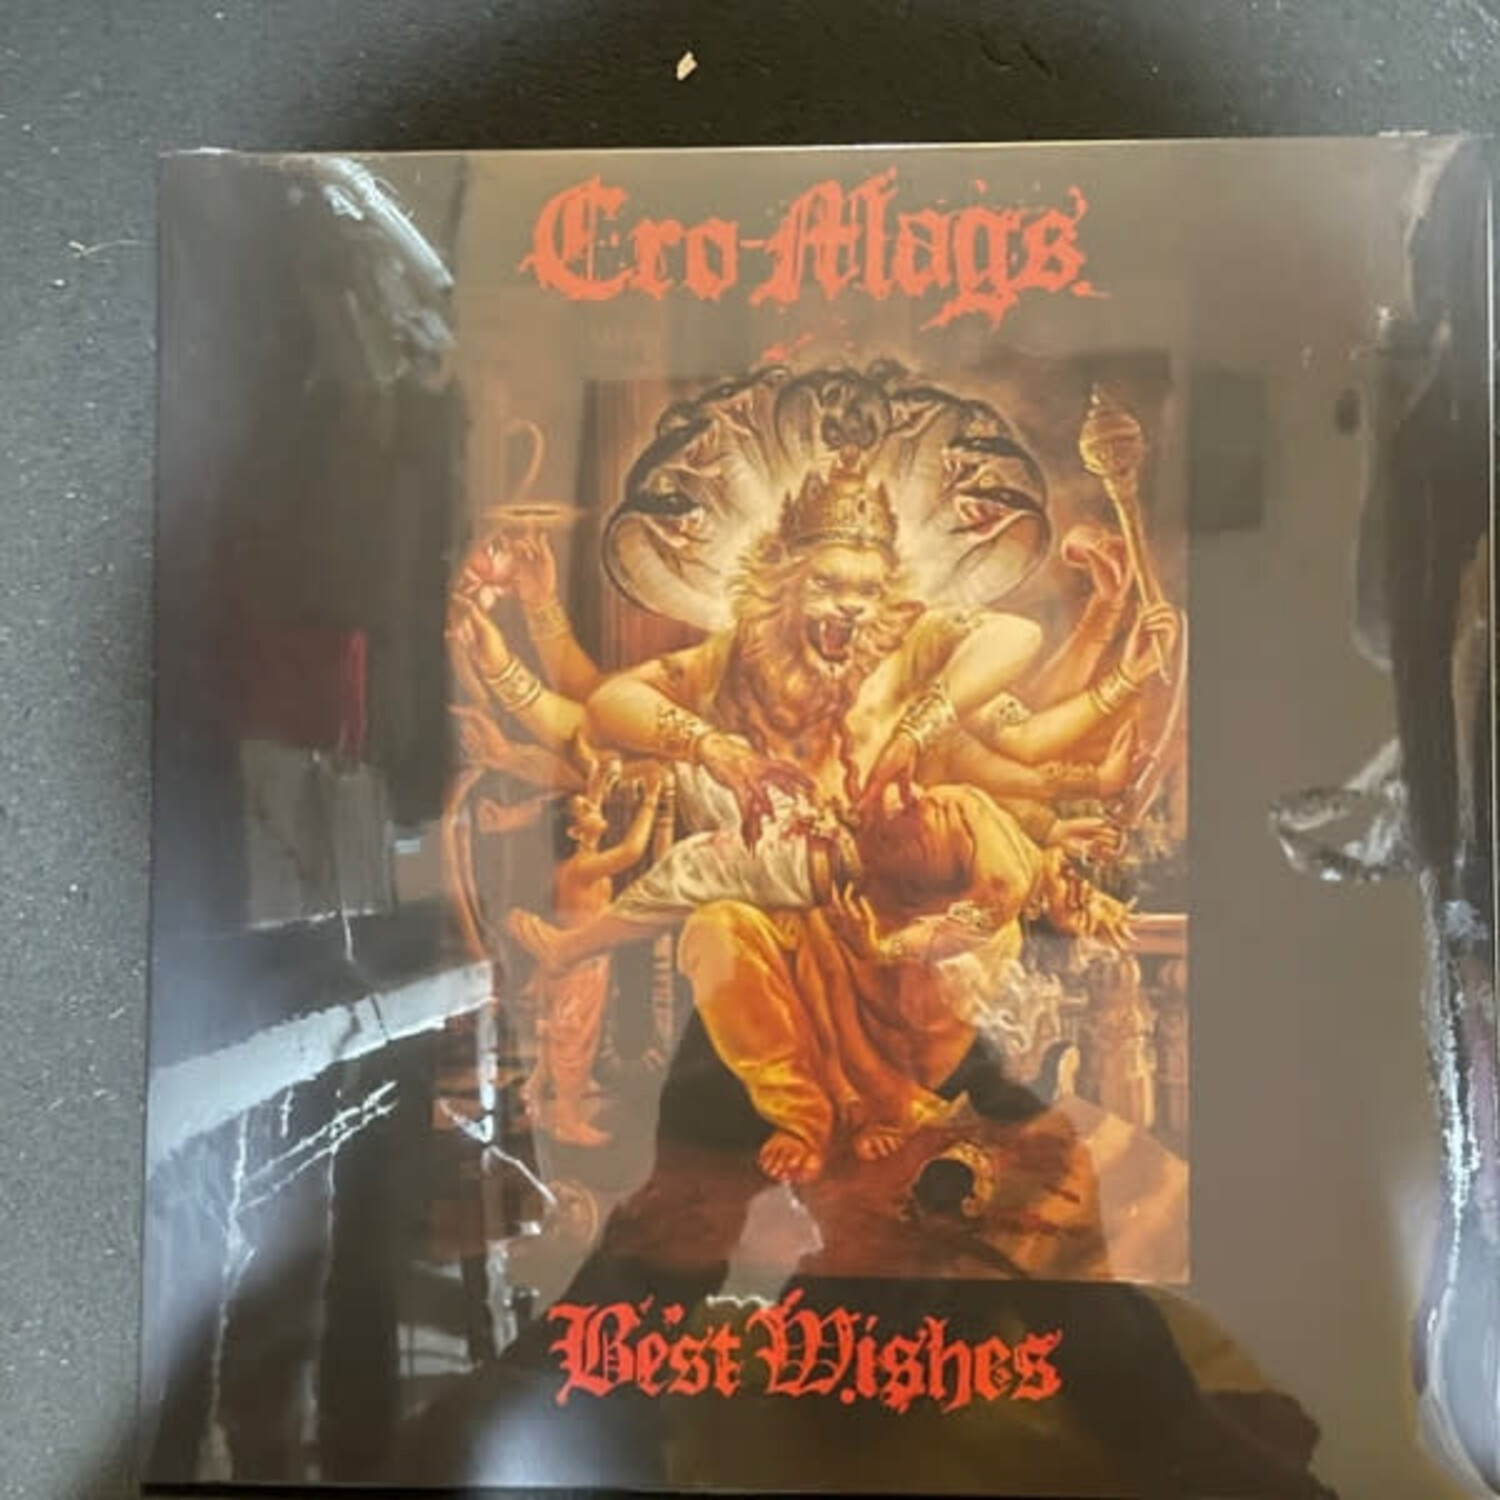 Cro-Mags - Best Wishes LP - Wax Trax Records